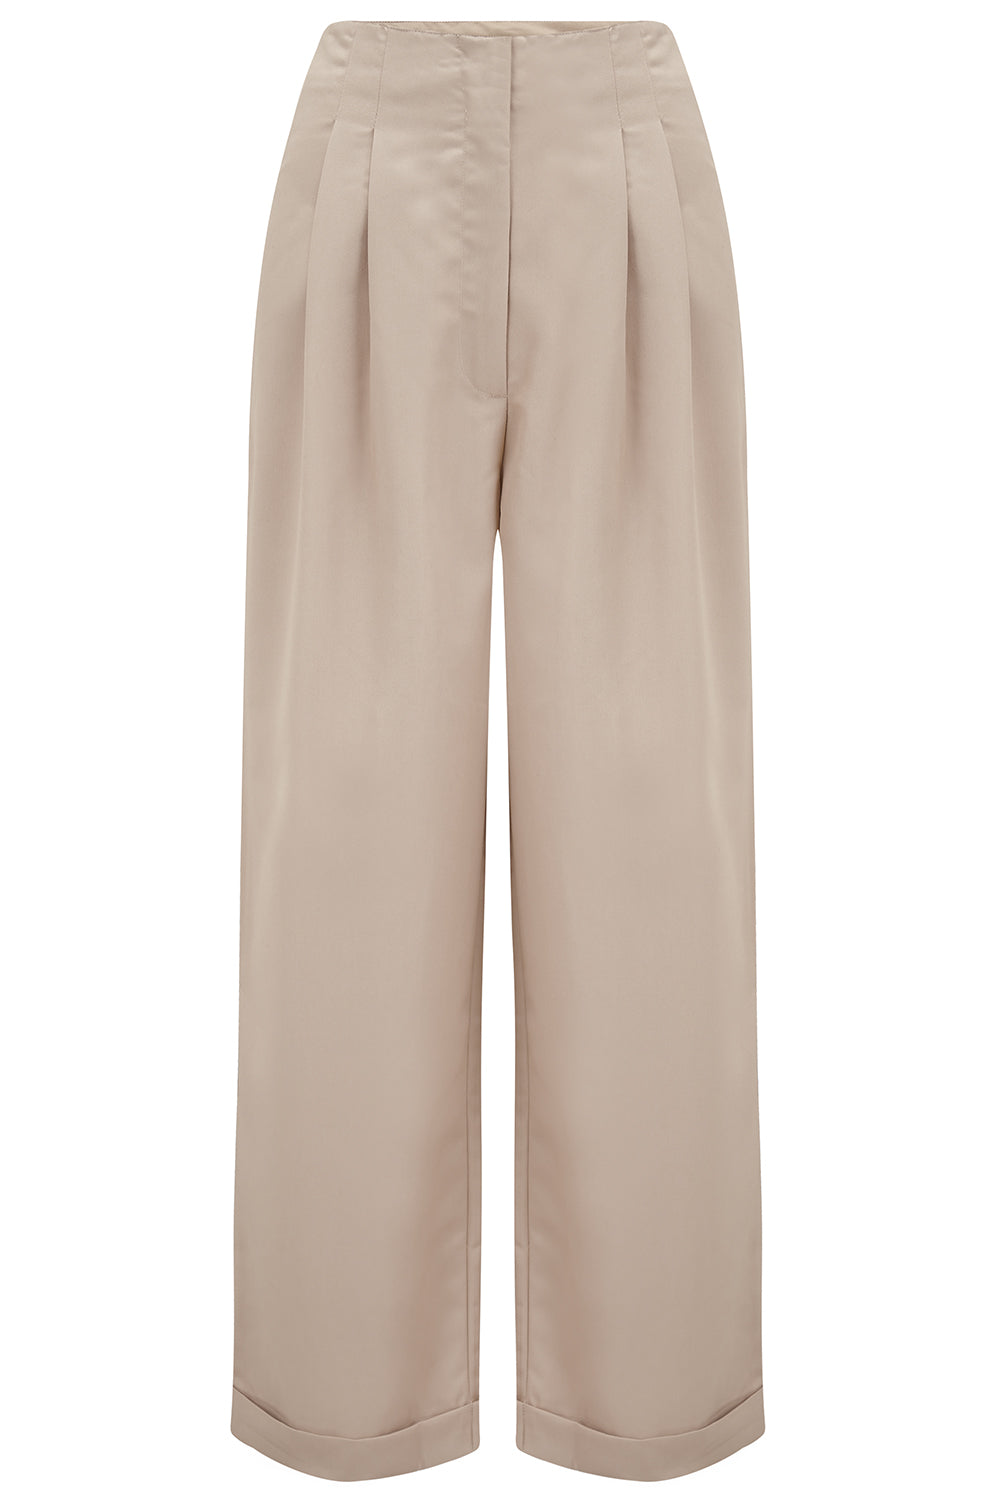 "Audrey" Tailored Trousers in Stone Perfectly Authentic 1940s Vintage Inspired Style - True and authentic vintage style clothing, inspired by the Classic styles of CC41 , WW2 and the fun 1950s RocknRoll era, for everyday wear plus events like Goodwood Revival, Twinwood Festival and Viva Las Vegas Rockabilly Weekend Rock n Romance The Seamstress Of Bloomsbury